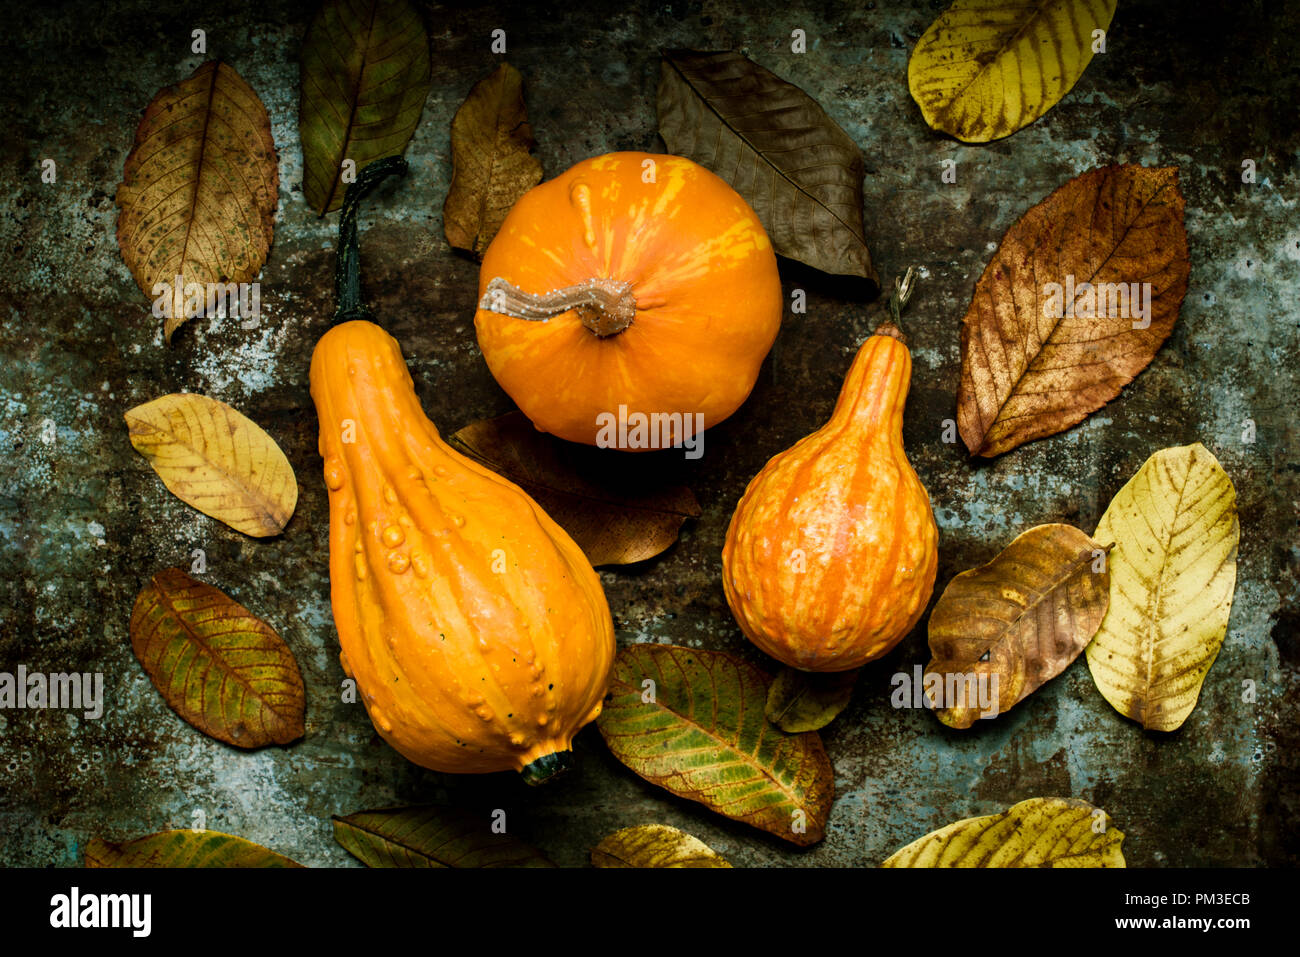 Happy Thanksgiving Background. Selection of various pumpkins on dark metal background. Autumn Harvest and Holiday still life. Autumn vegetables. Stock Photo